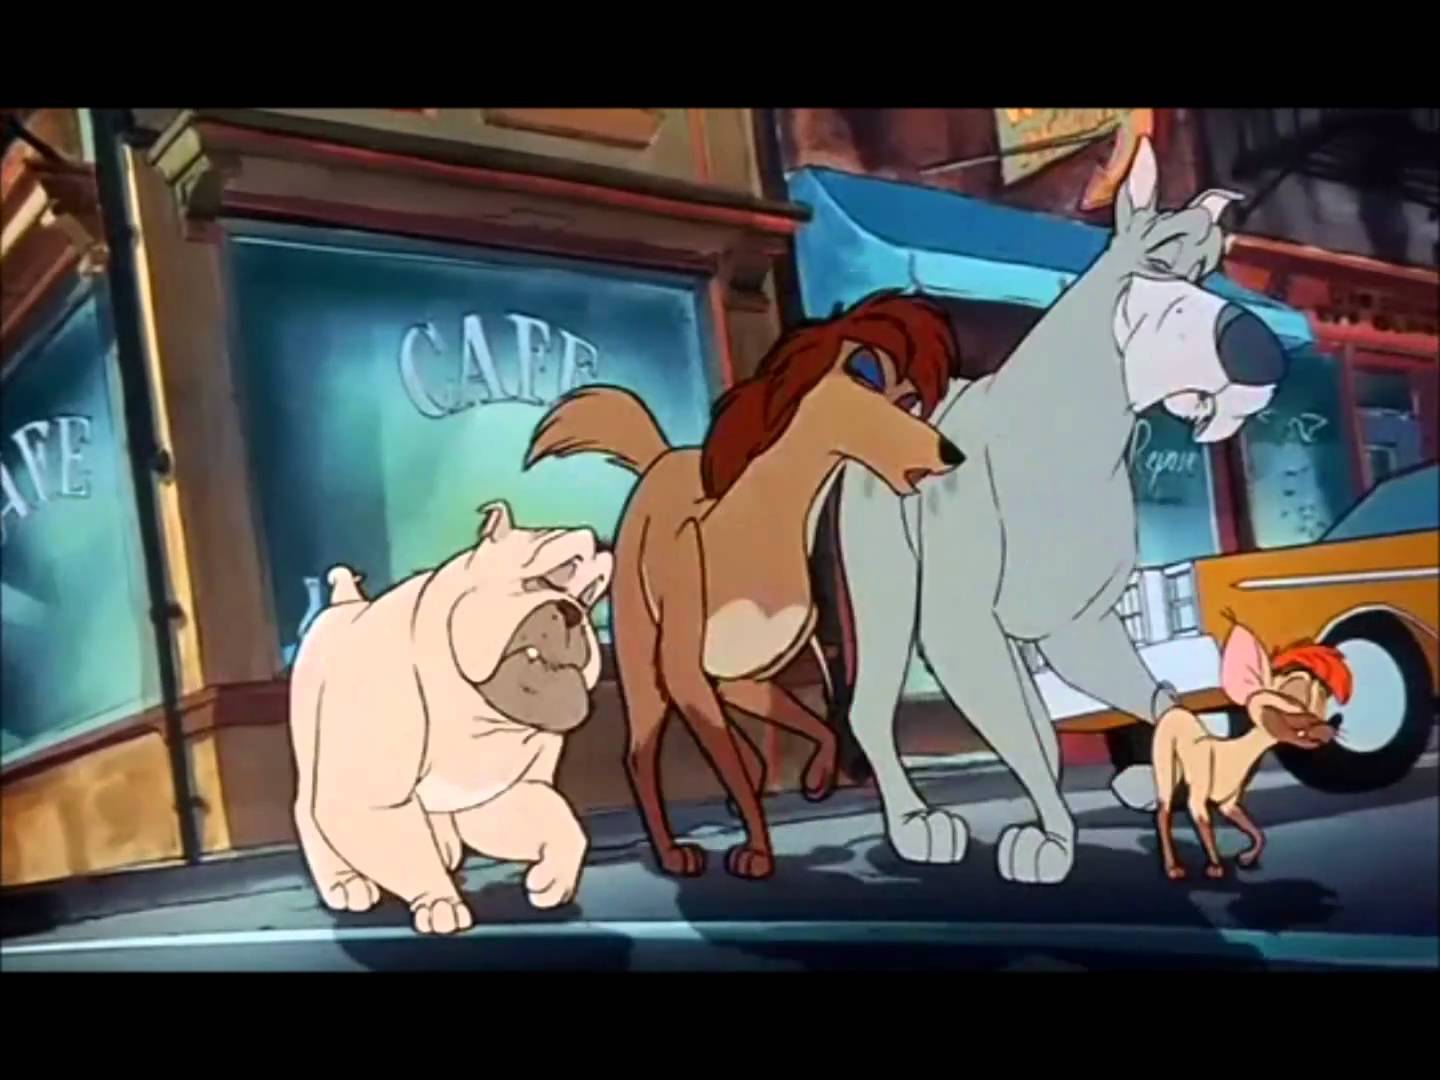 Oliver & Company HD wallpapers, Desktop wallpaper - most viewed